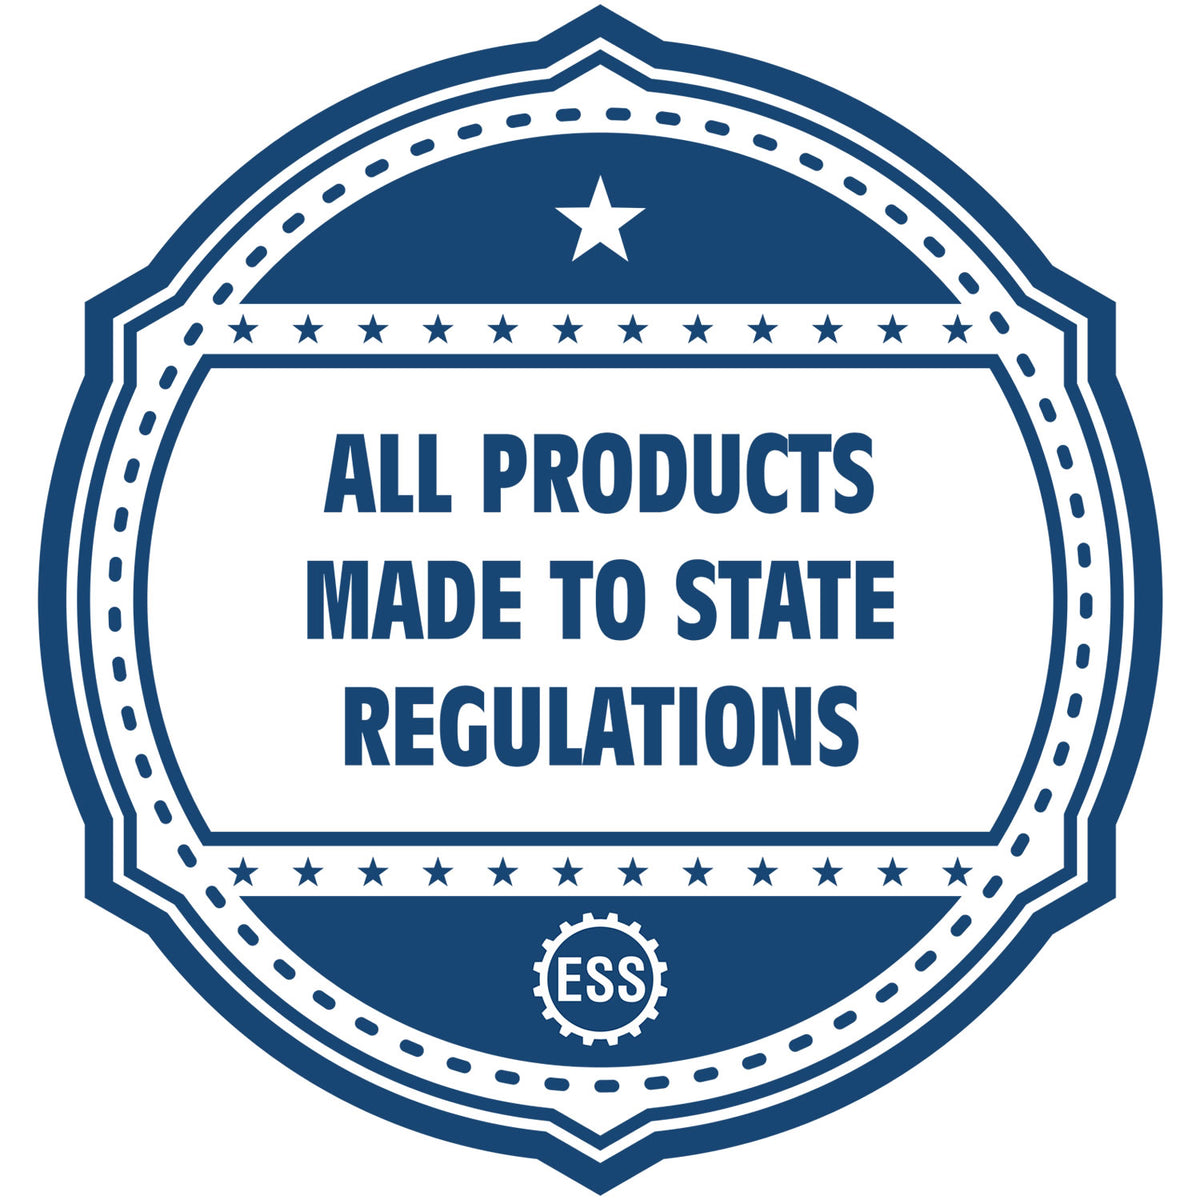 An icon or badge element for the Utah Landscape Architectural Seal Stamp showing that this product is made in compliance with state regulations.